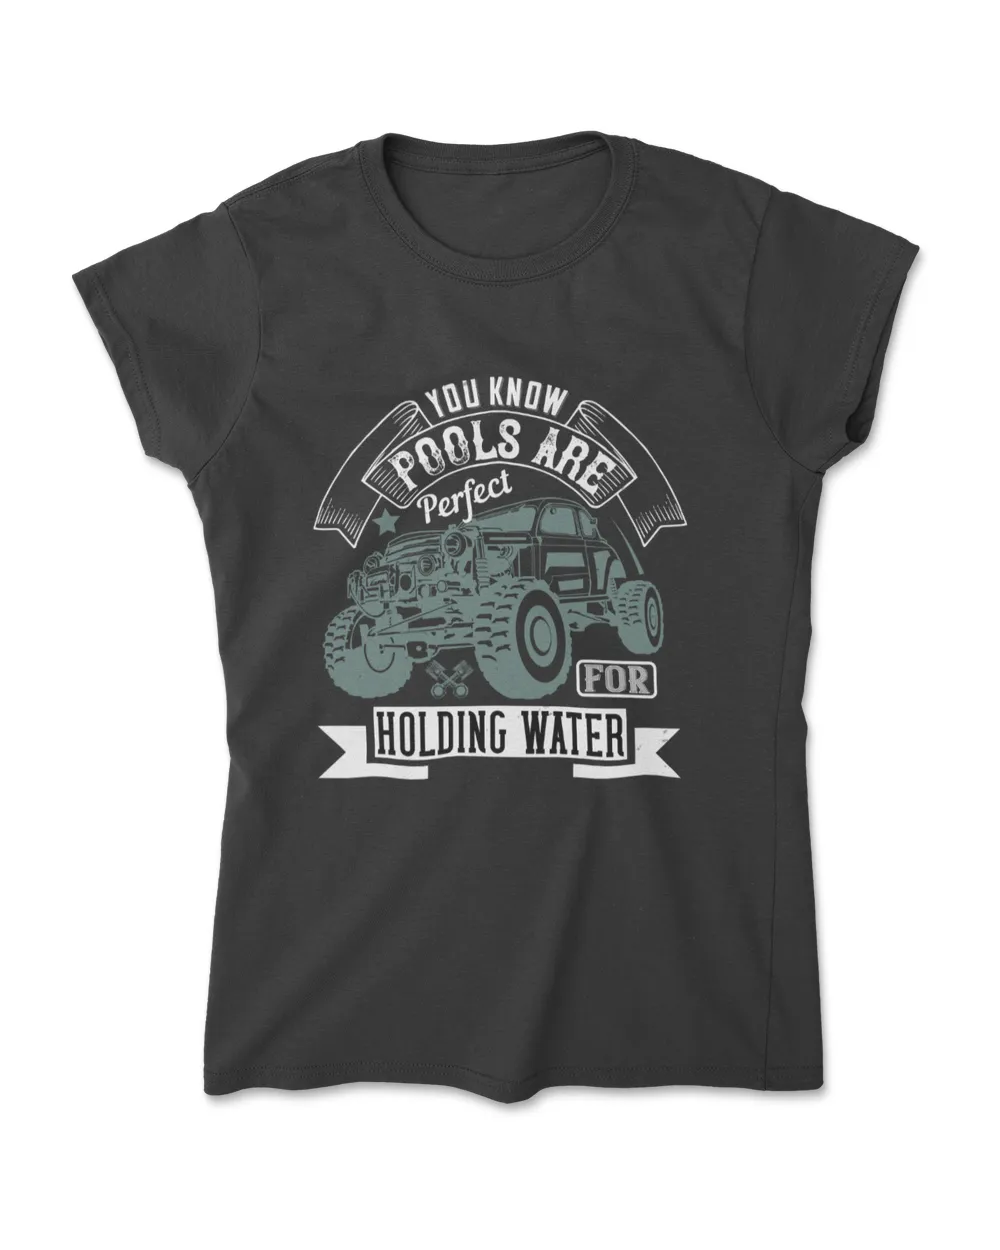 You Know Pools Are Perfect For Holding Water Hot Rod T-Shirt